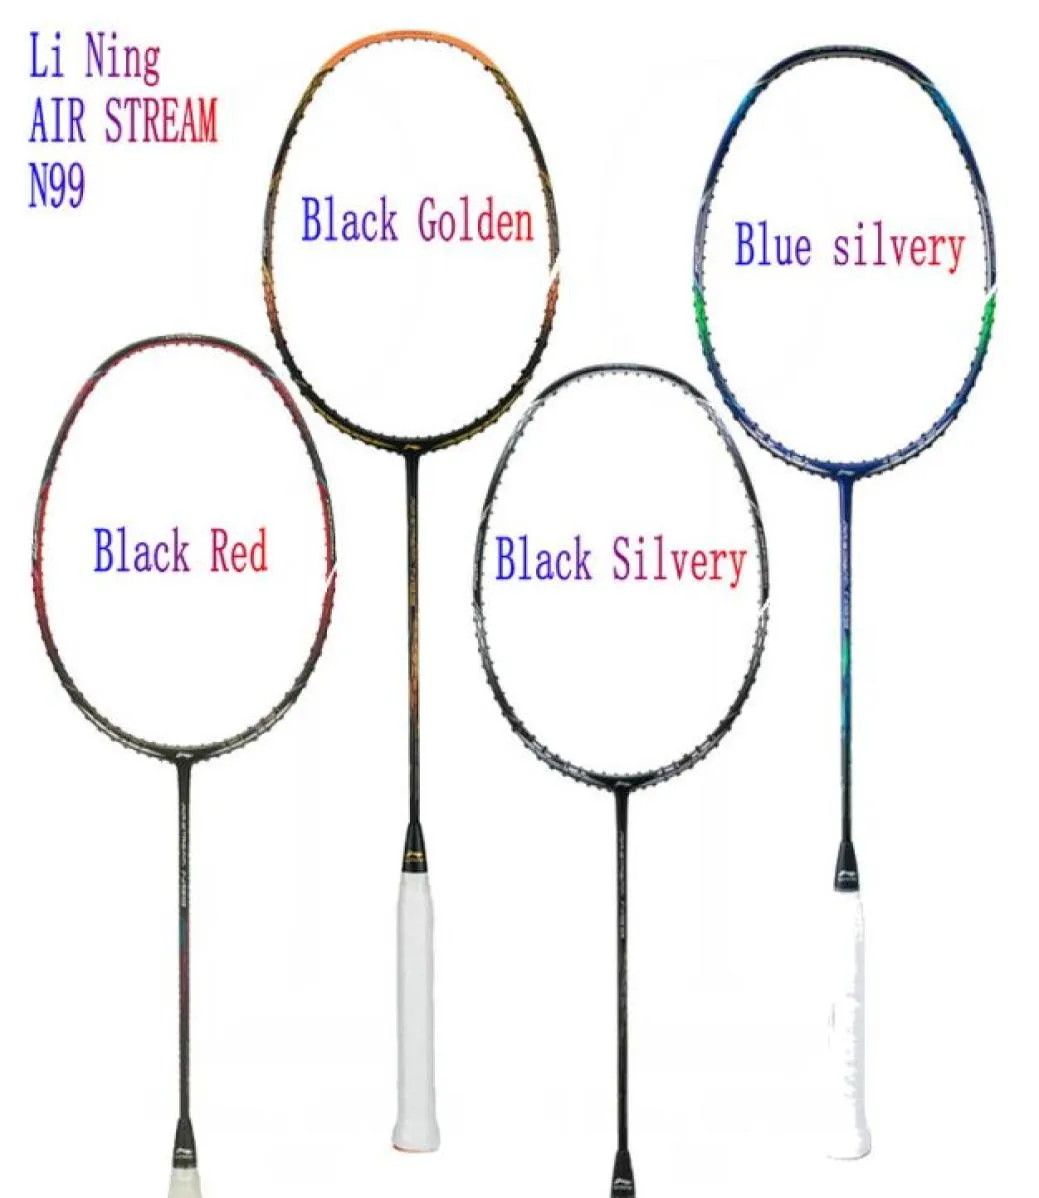 LINING AIR STREAM N99 II Chen Long Badminton national team Racquet High elasticity carbon racket Line completion perfect85881016937